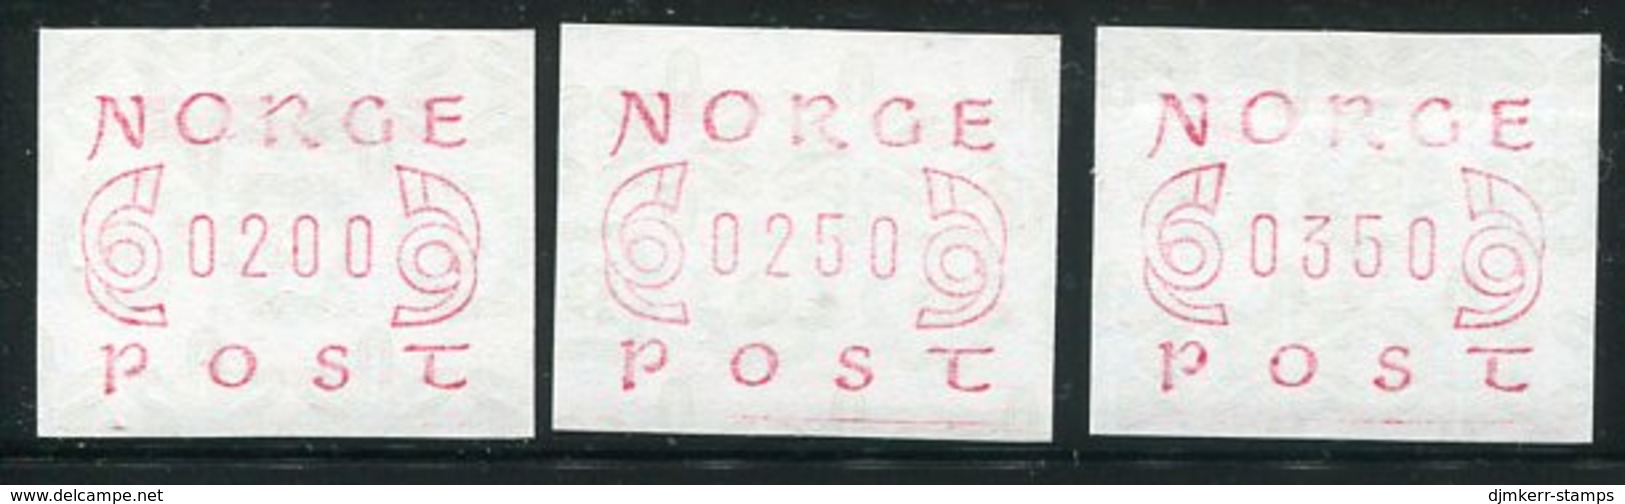 NORWAY 1980 Posthorns And Numeral Without Frame, Three Values  MNH / **.  Michel 2 - Vignette [ATM]